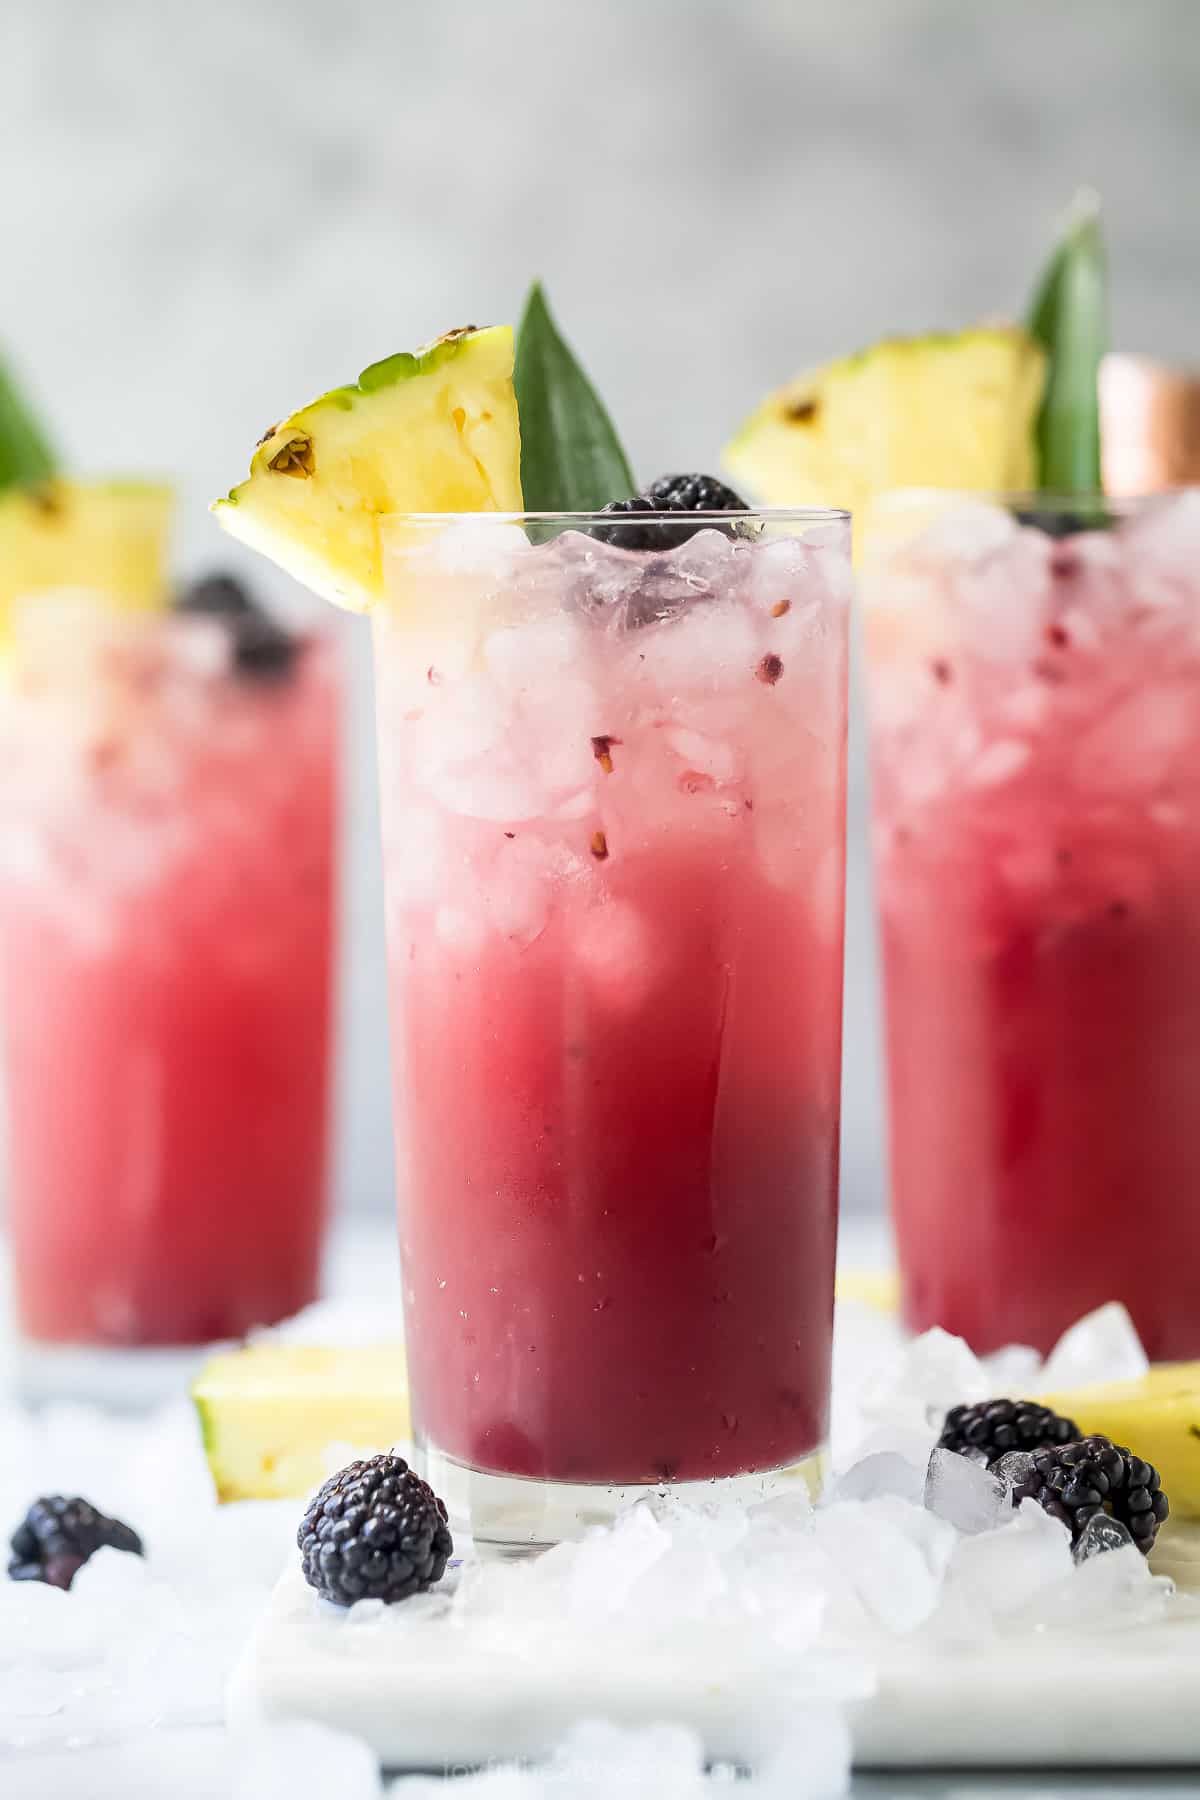 A close-up shot of three virgin pineapple cocktails garnished with pineapple wedges and raspberries